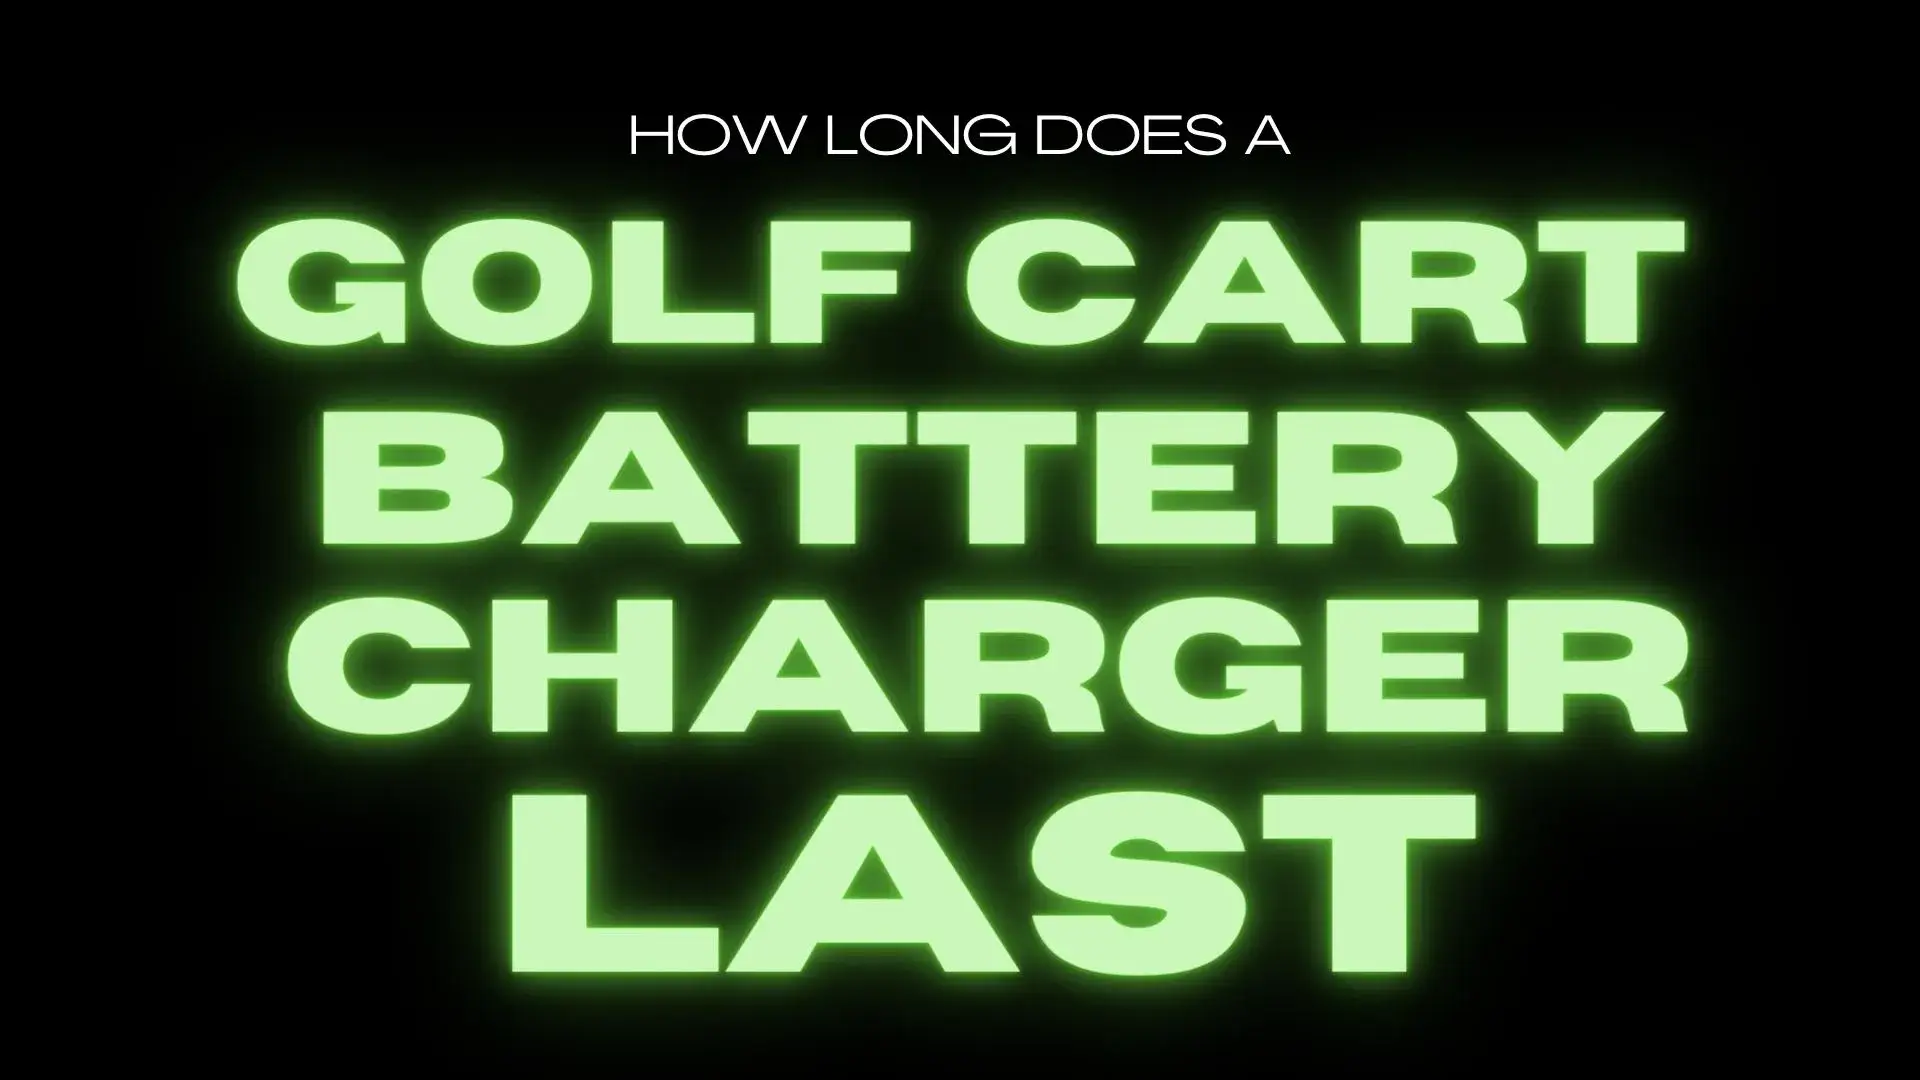 How Long Does a Golf Cart Battery Charger Last